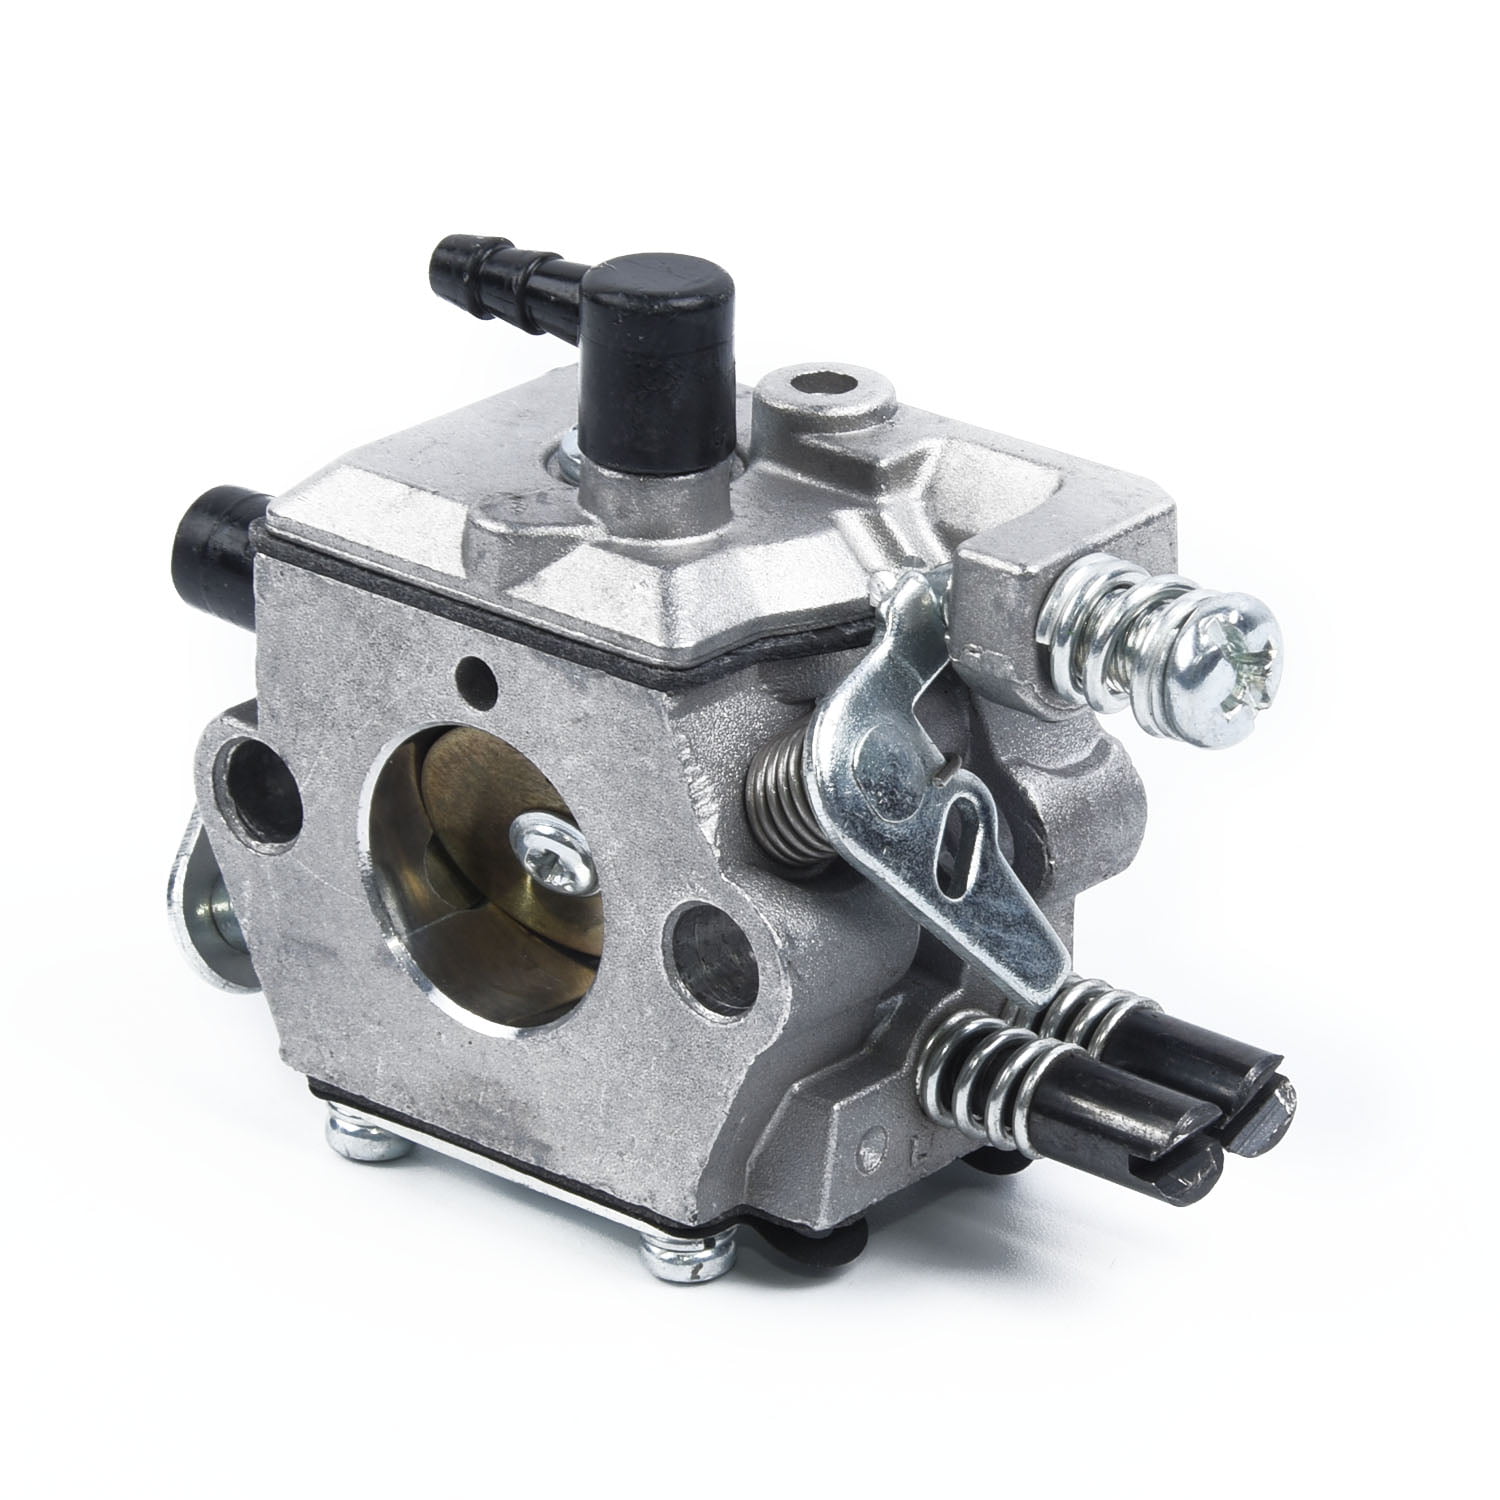 Carburetor for 2-Stroke Engine Chinese Chainsaw 4500 5200 5800 45cc 52 58cc Ah